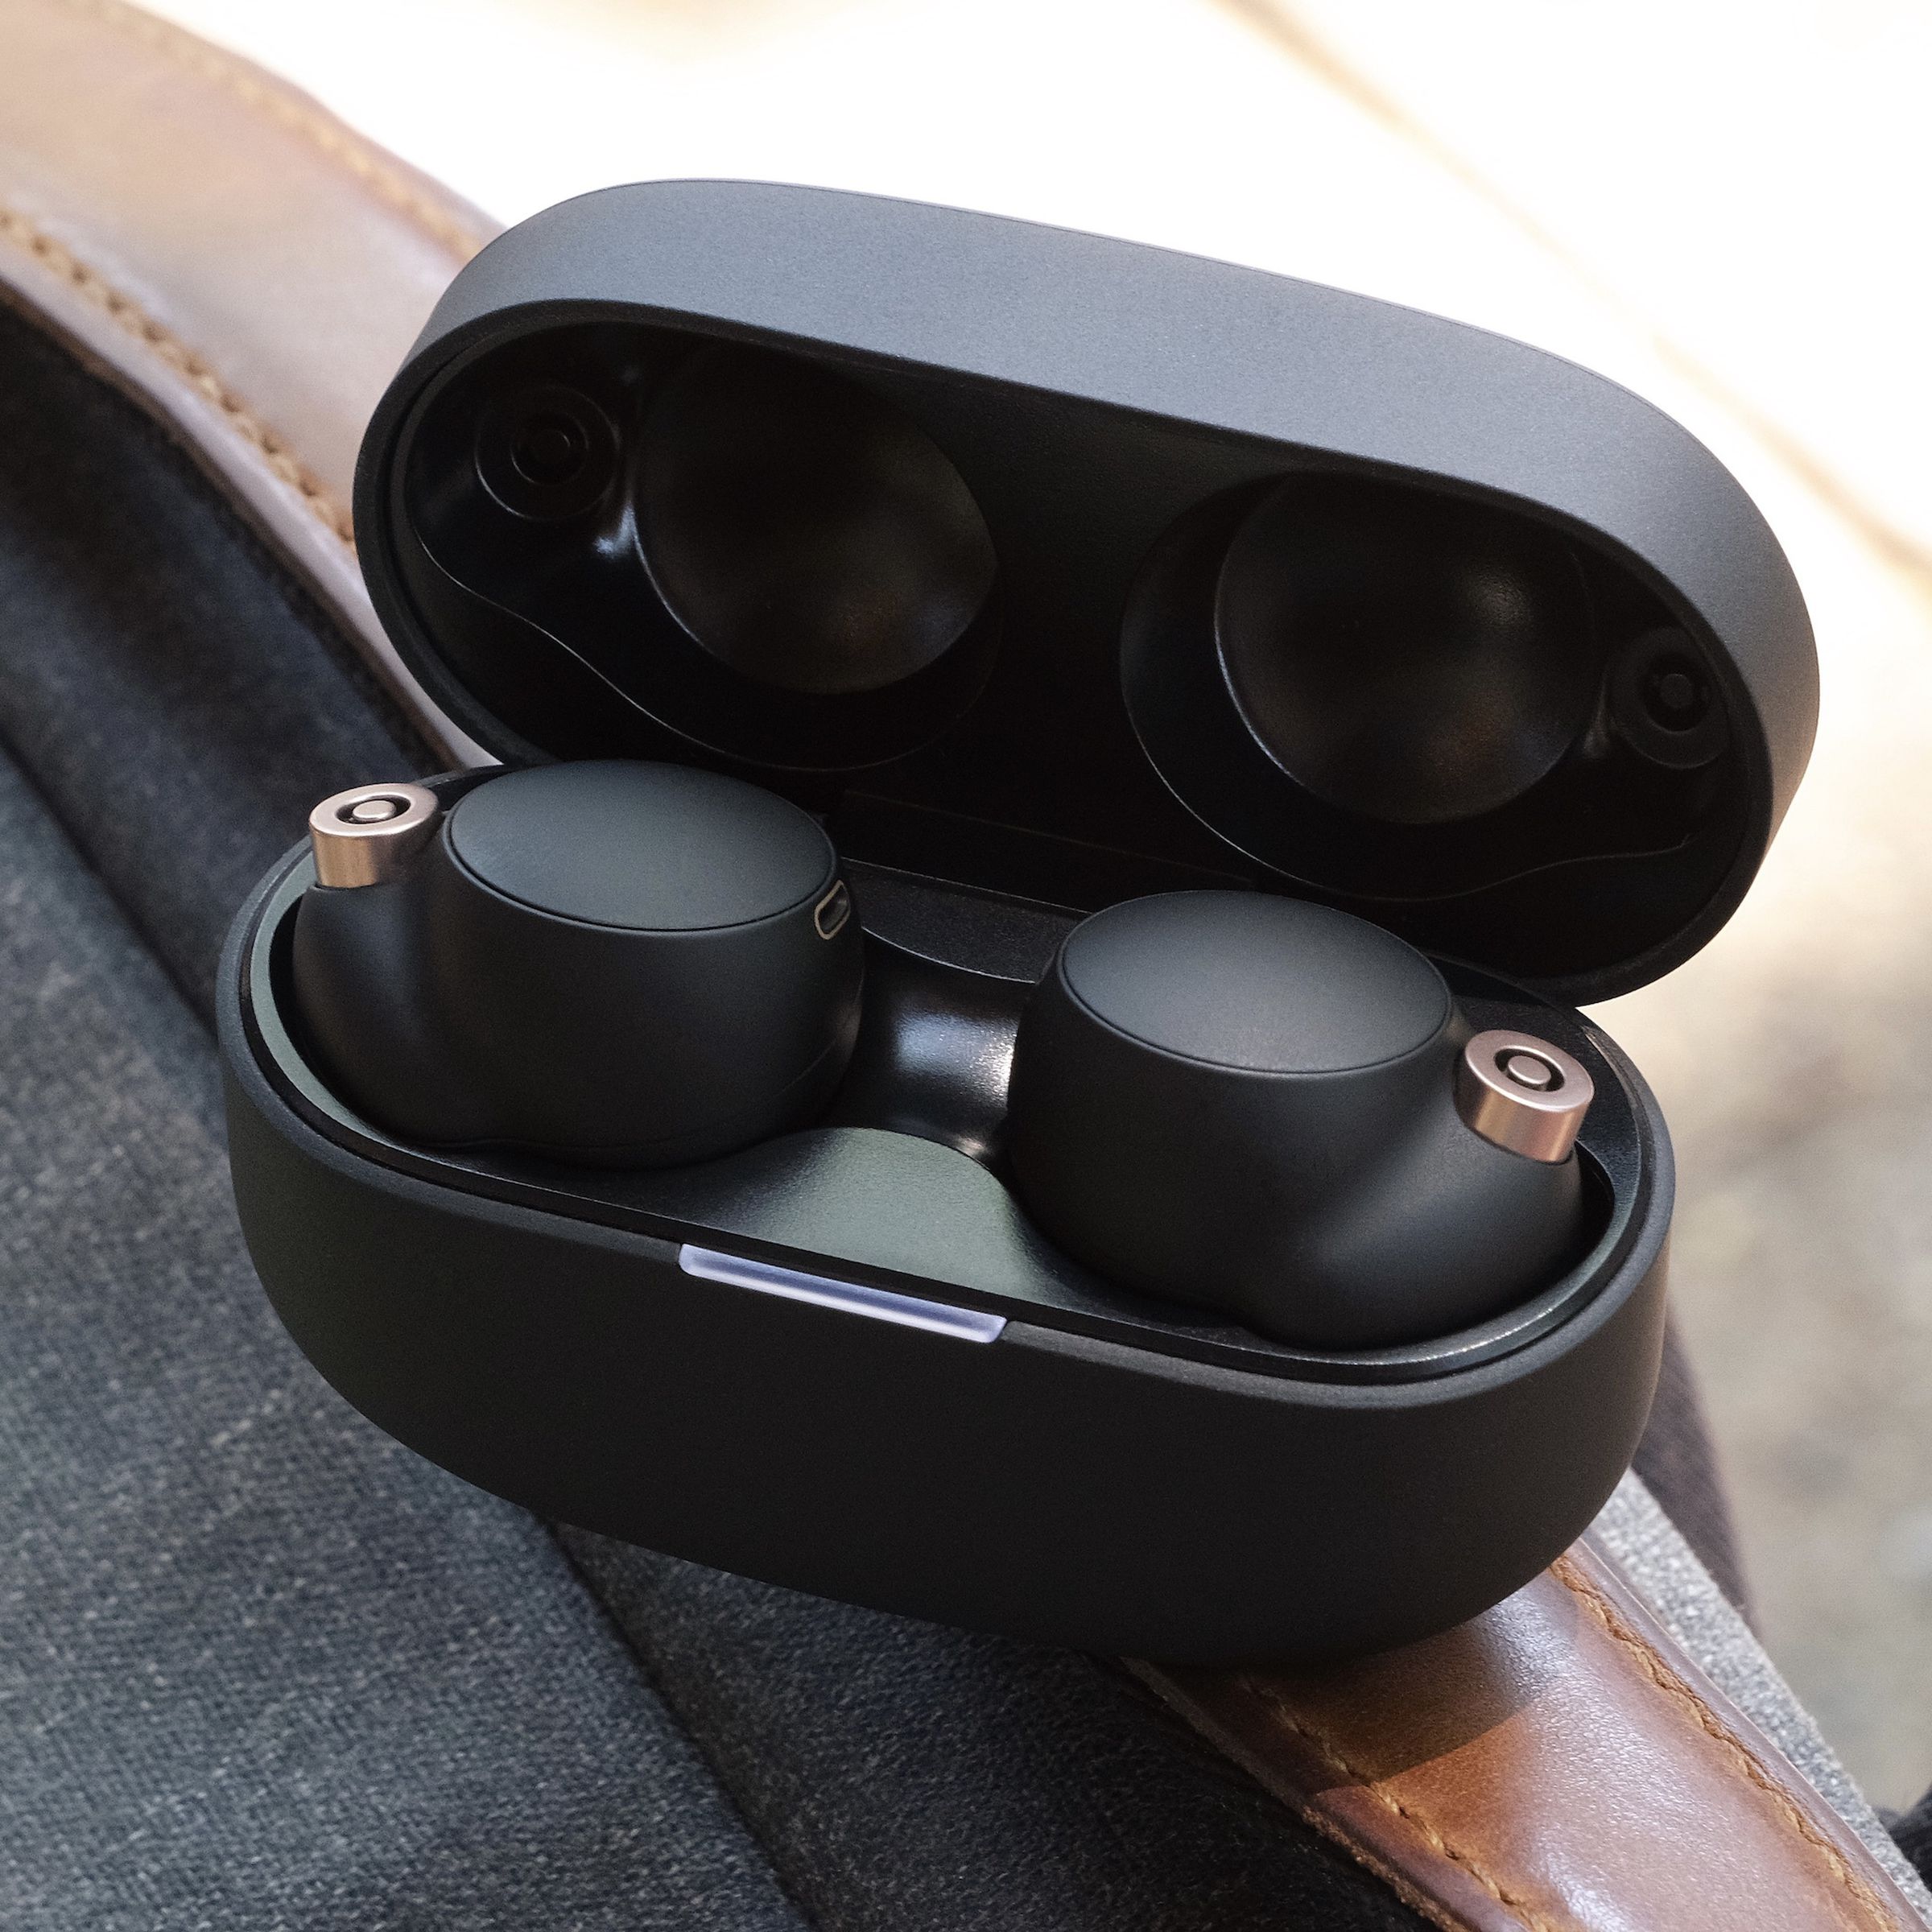 Sony’s WF-1000XM4 excellent noise-canceling wireless earbuds are on sale.